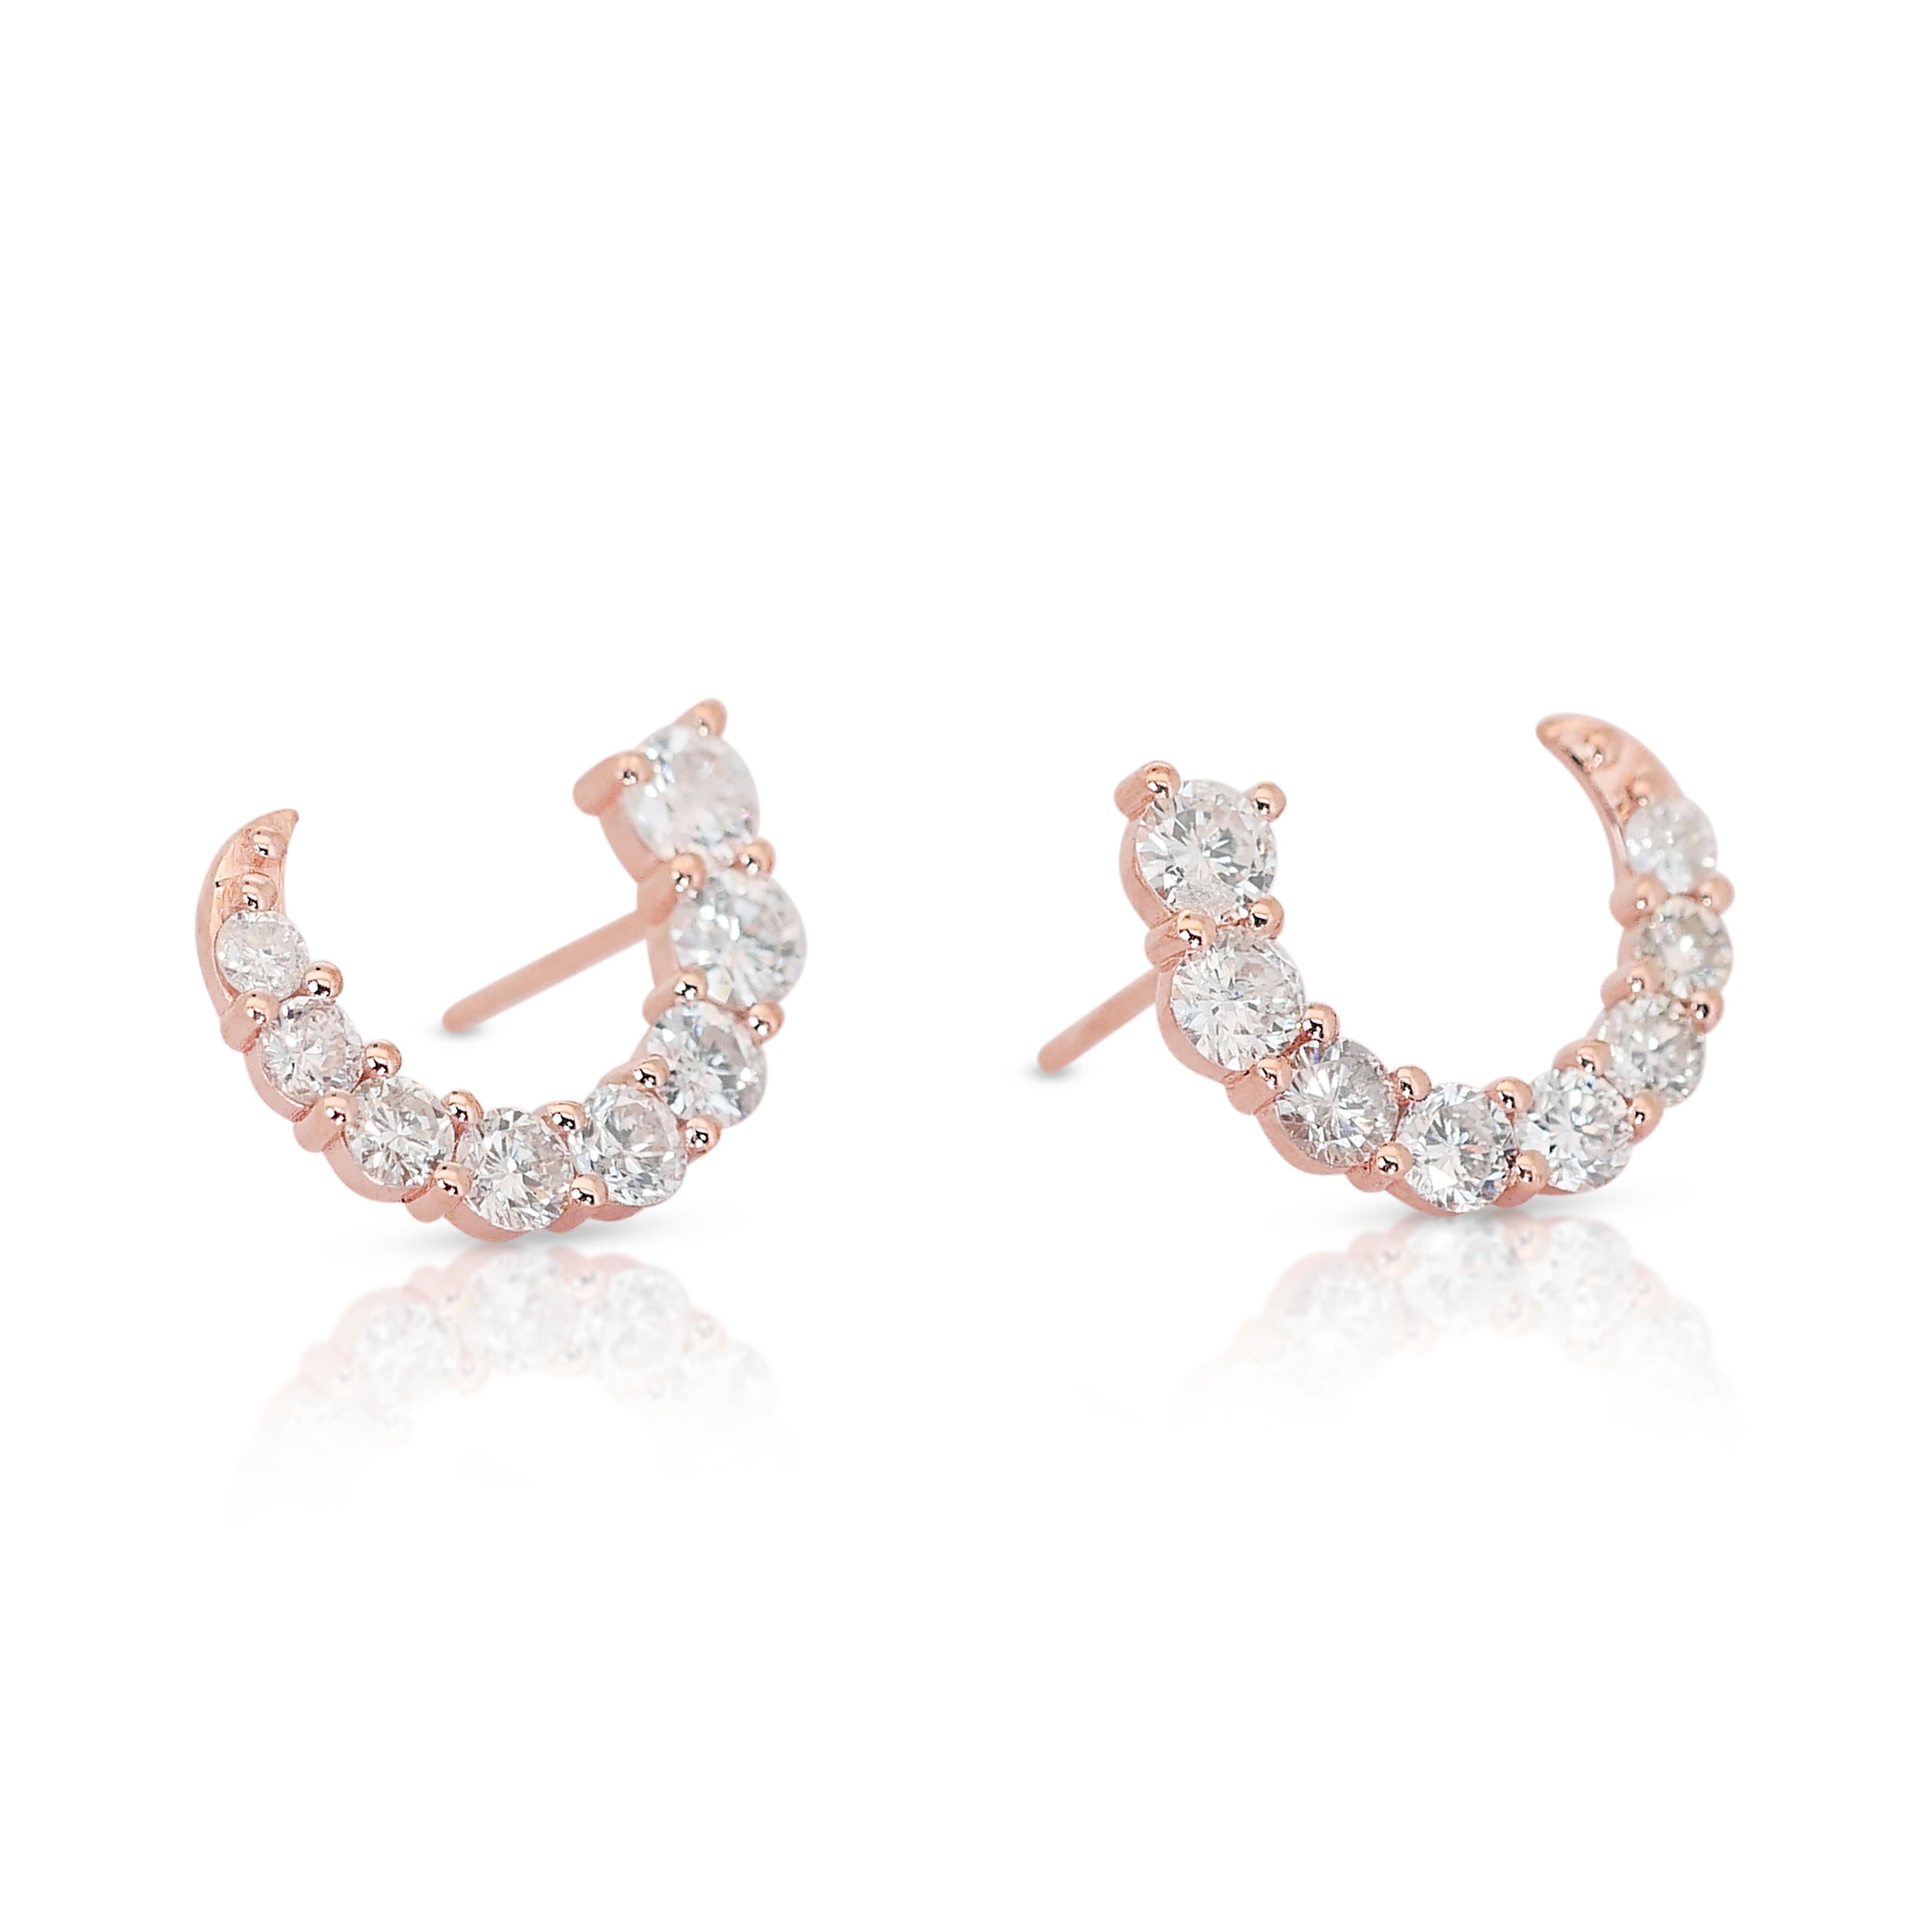 Fascinating 14k Rose Gold Natural Diamond Hoop Earrings w/1.85 ct -IGI Certified In New Condition For Sale In רמת גן, IL